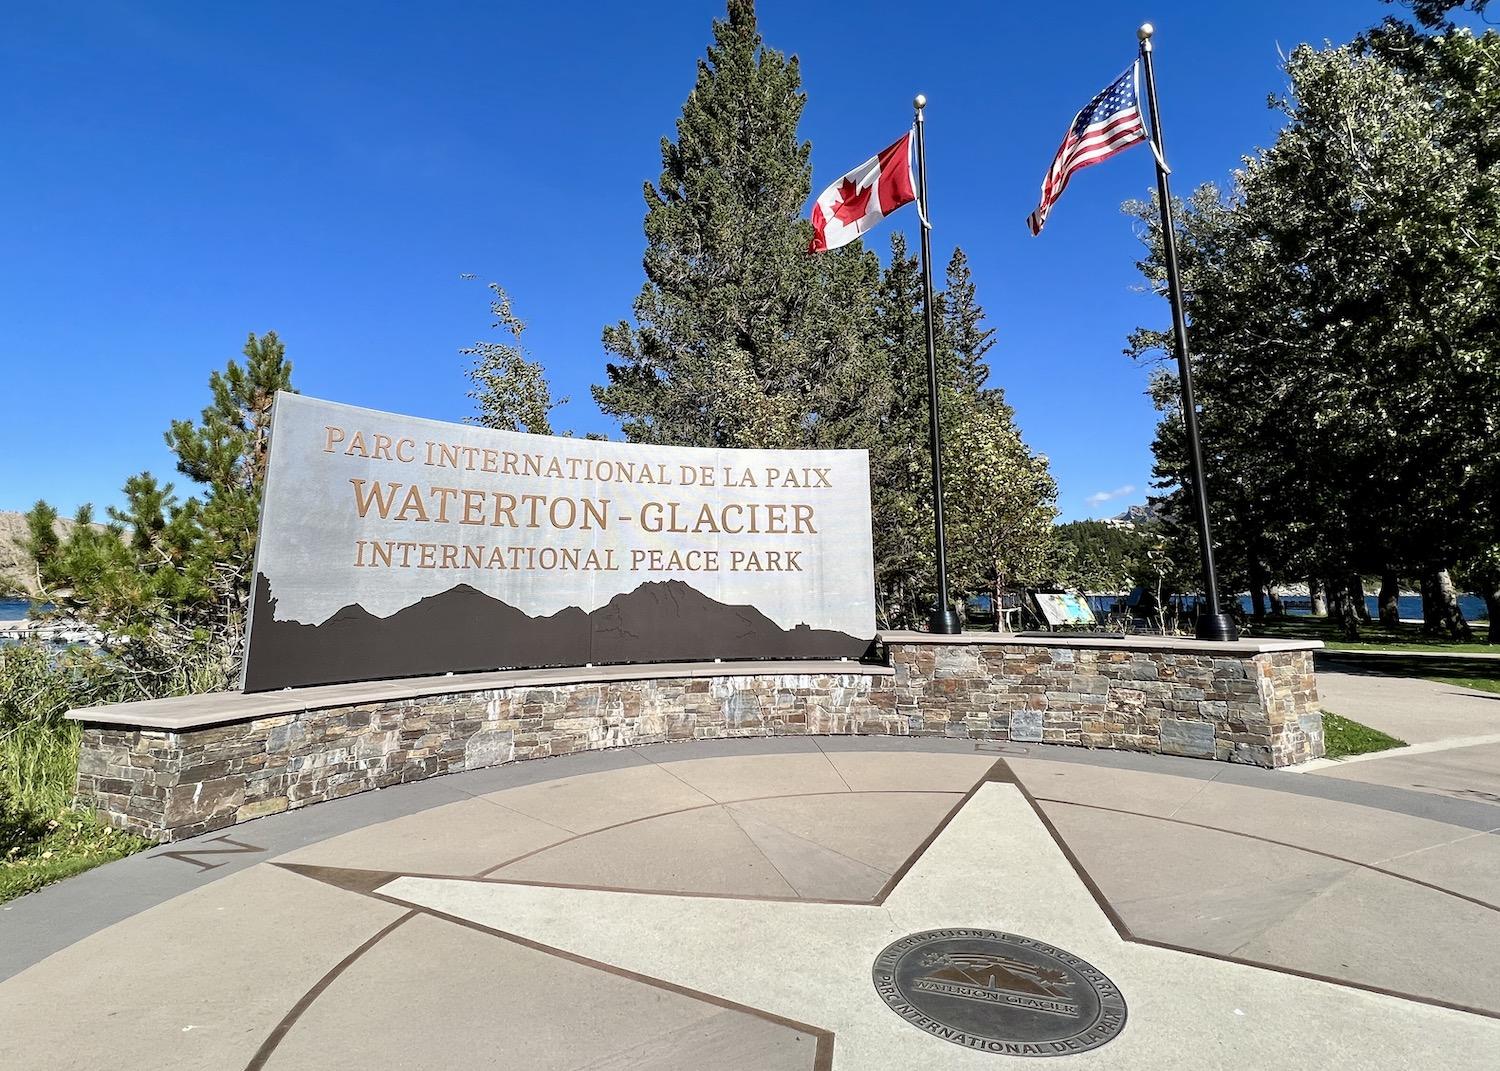 In Waterton's Peace Park Plaza, the Waterton-Glacier International Peace Park is marked by a grand entrance and a UNESCO World Heritage Site plaque.